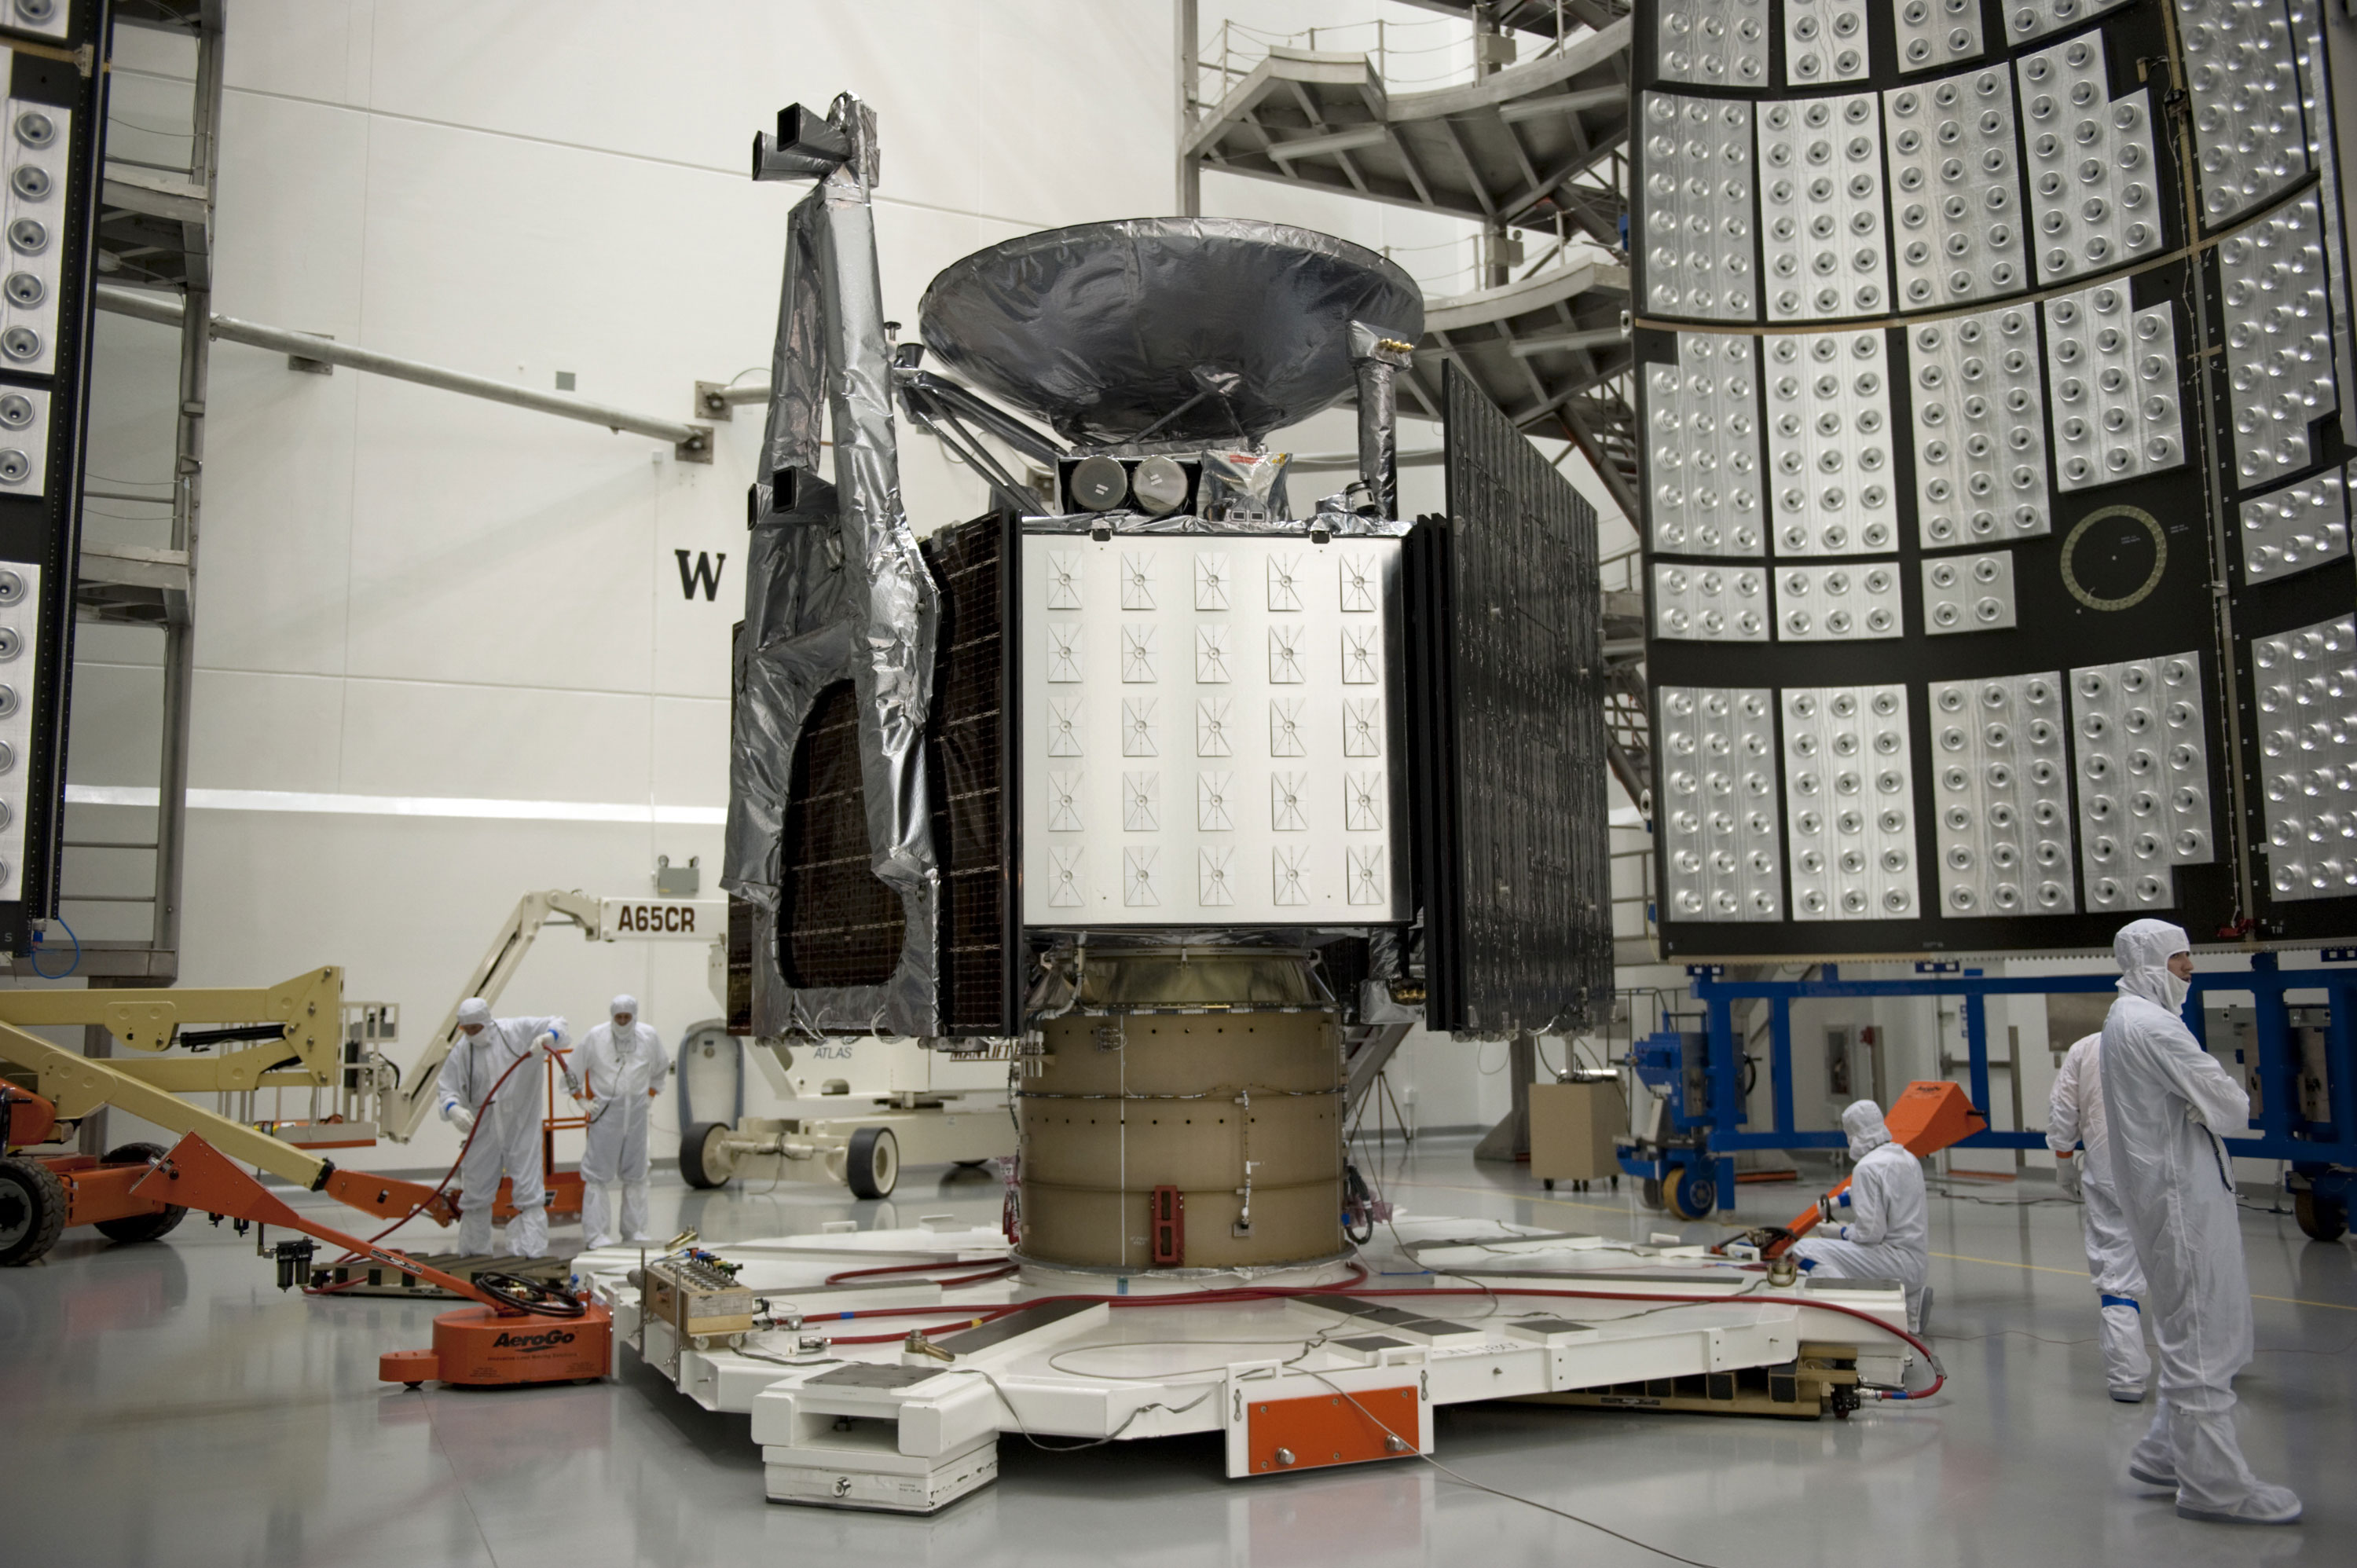 The largest of Juno’s six MWR antennas (shown here) takes up a full side of the spacecraft. Credit: NASA